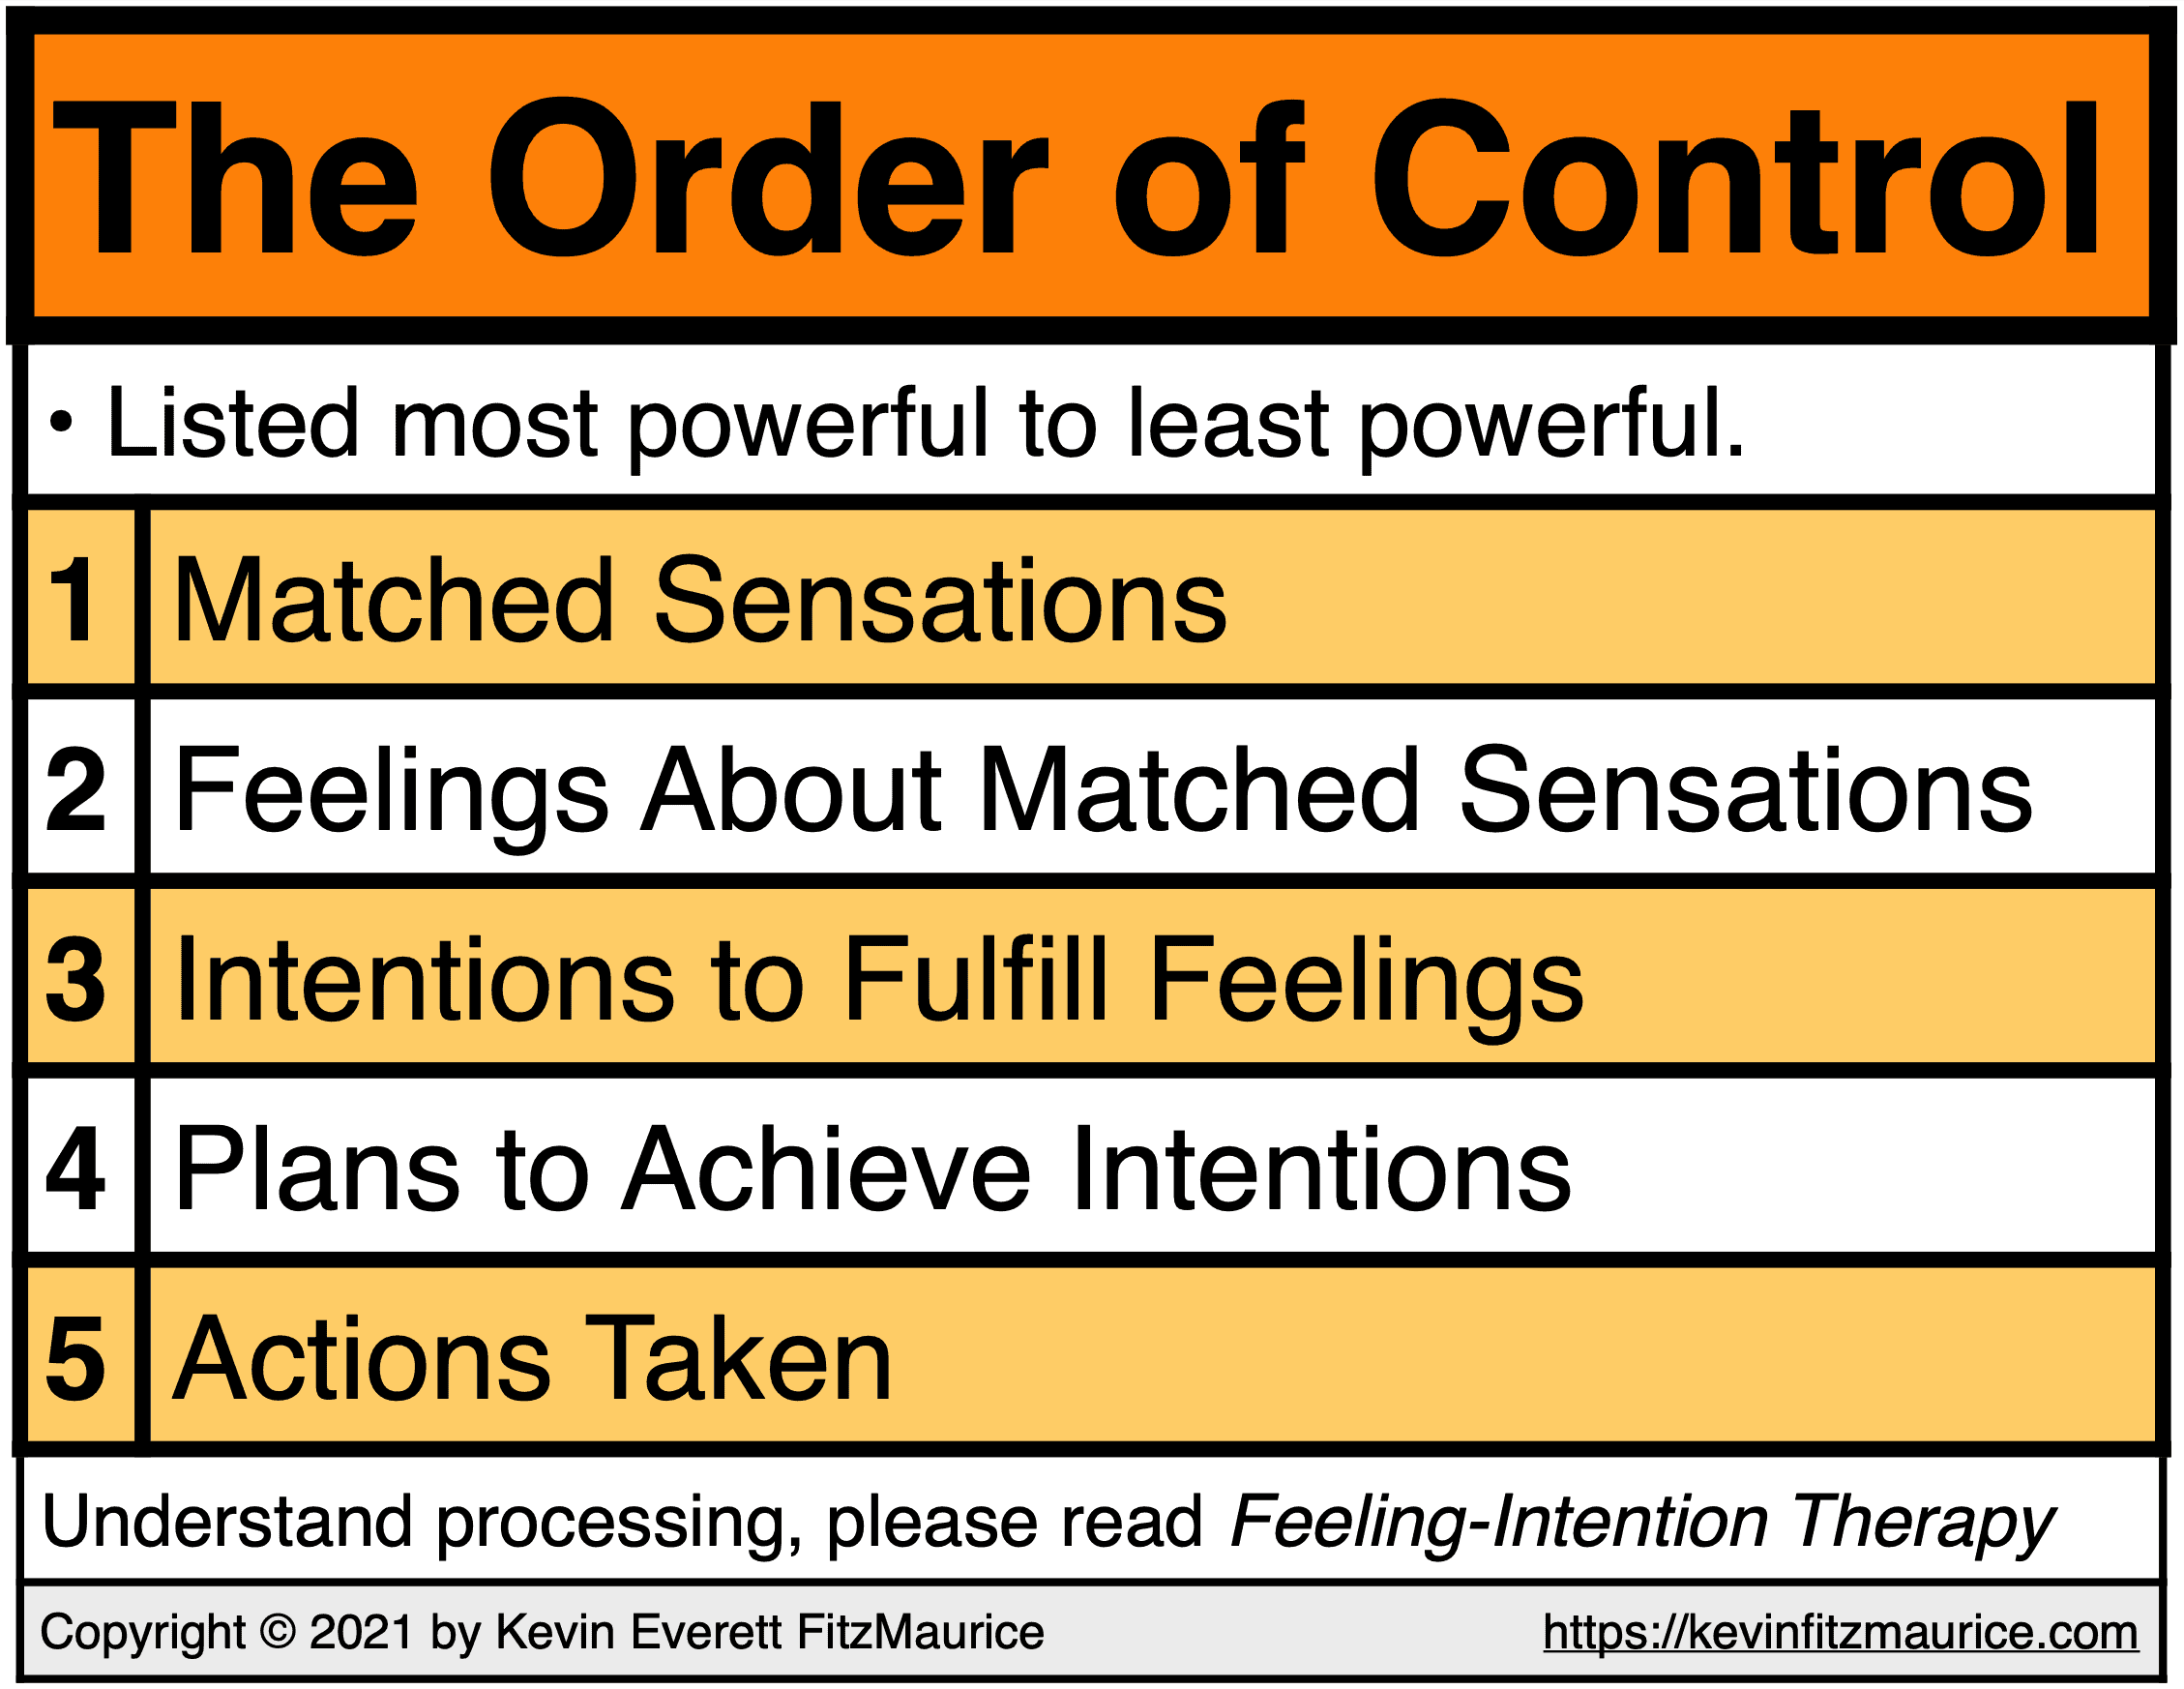 What is the order of control of your mind?